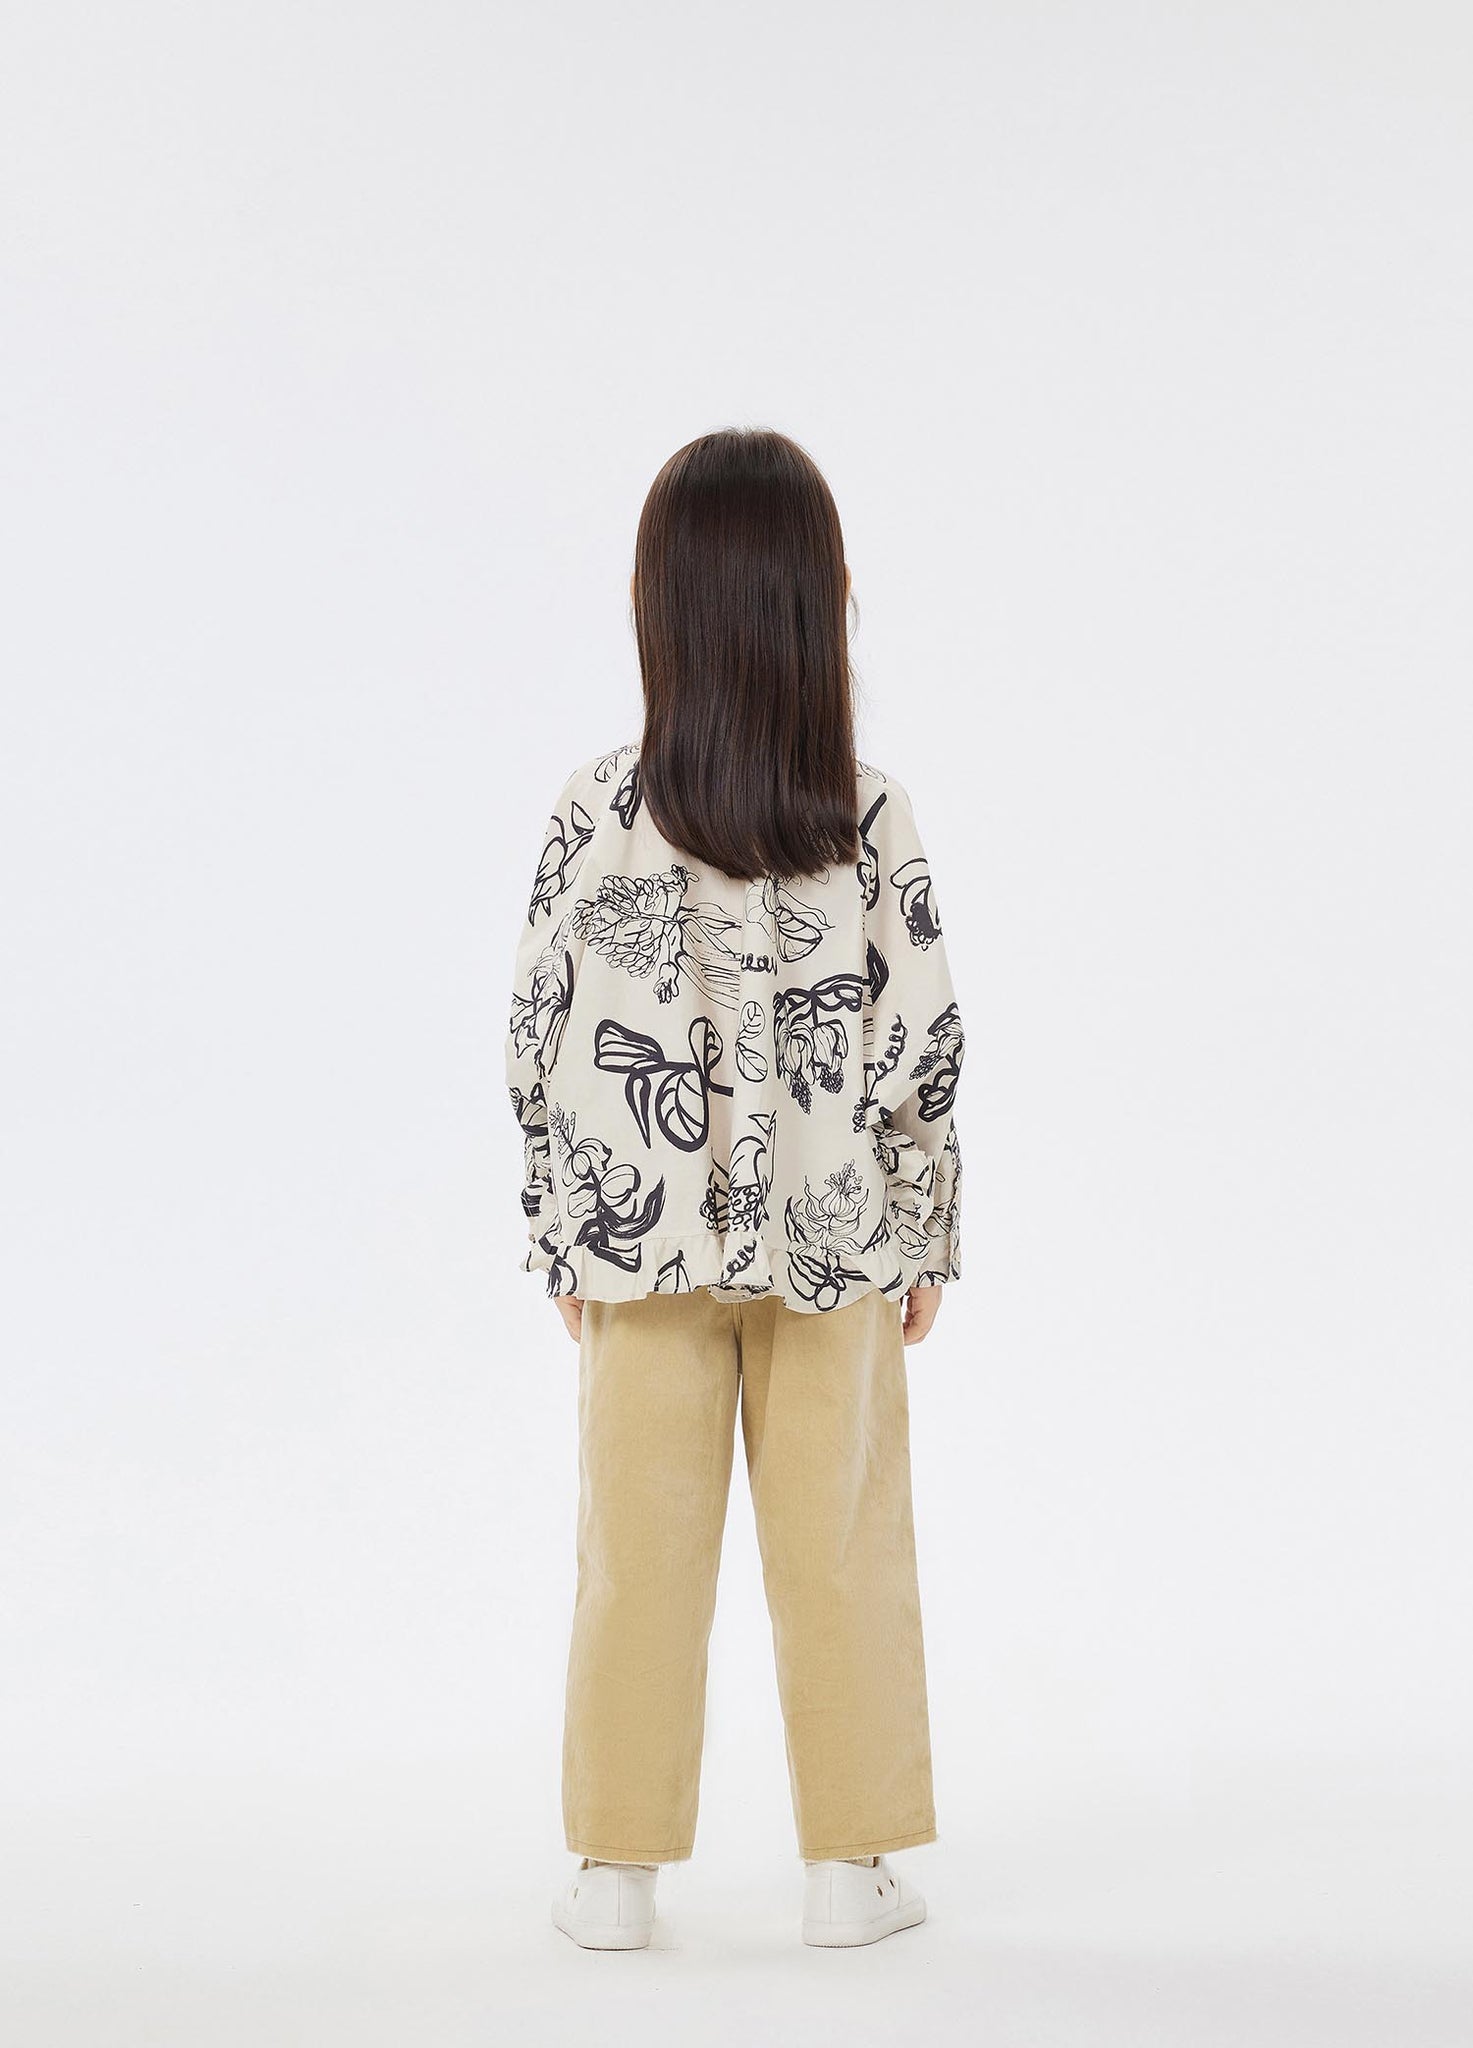 Shirt / jnby by JNBY Floral Long Sleeve Shirt